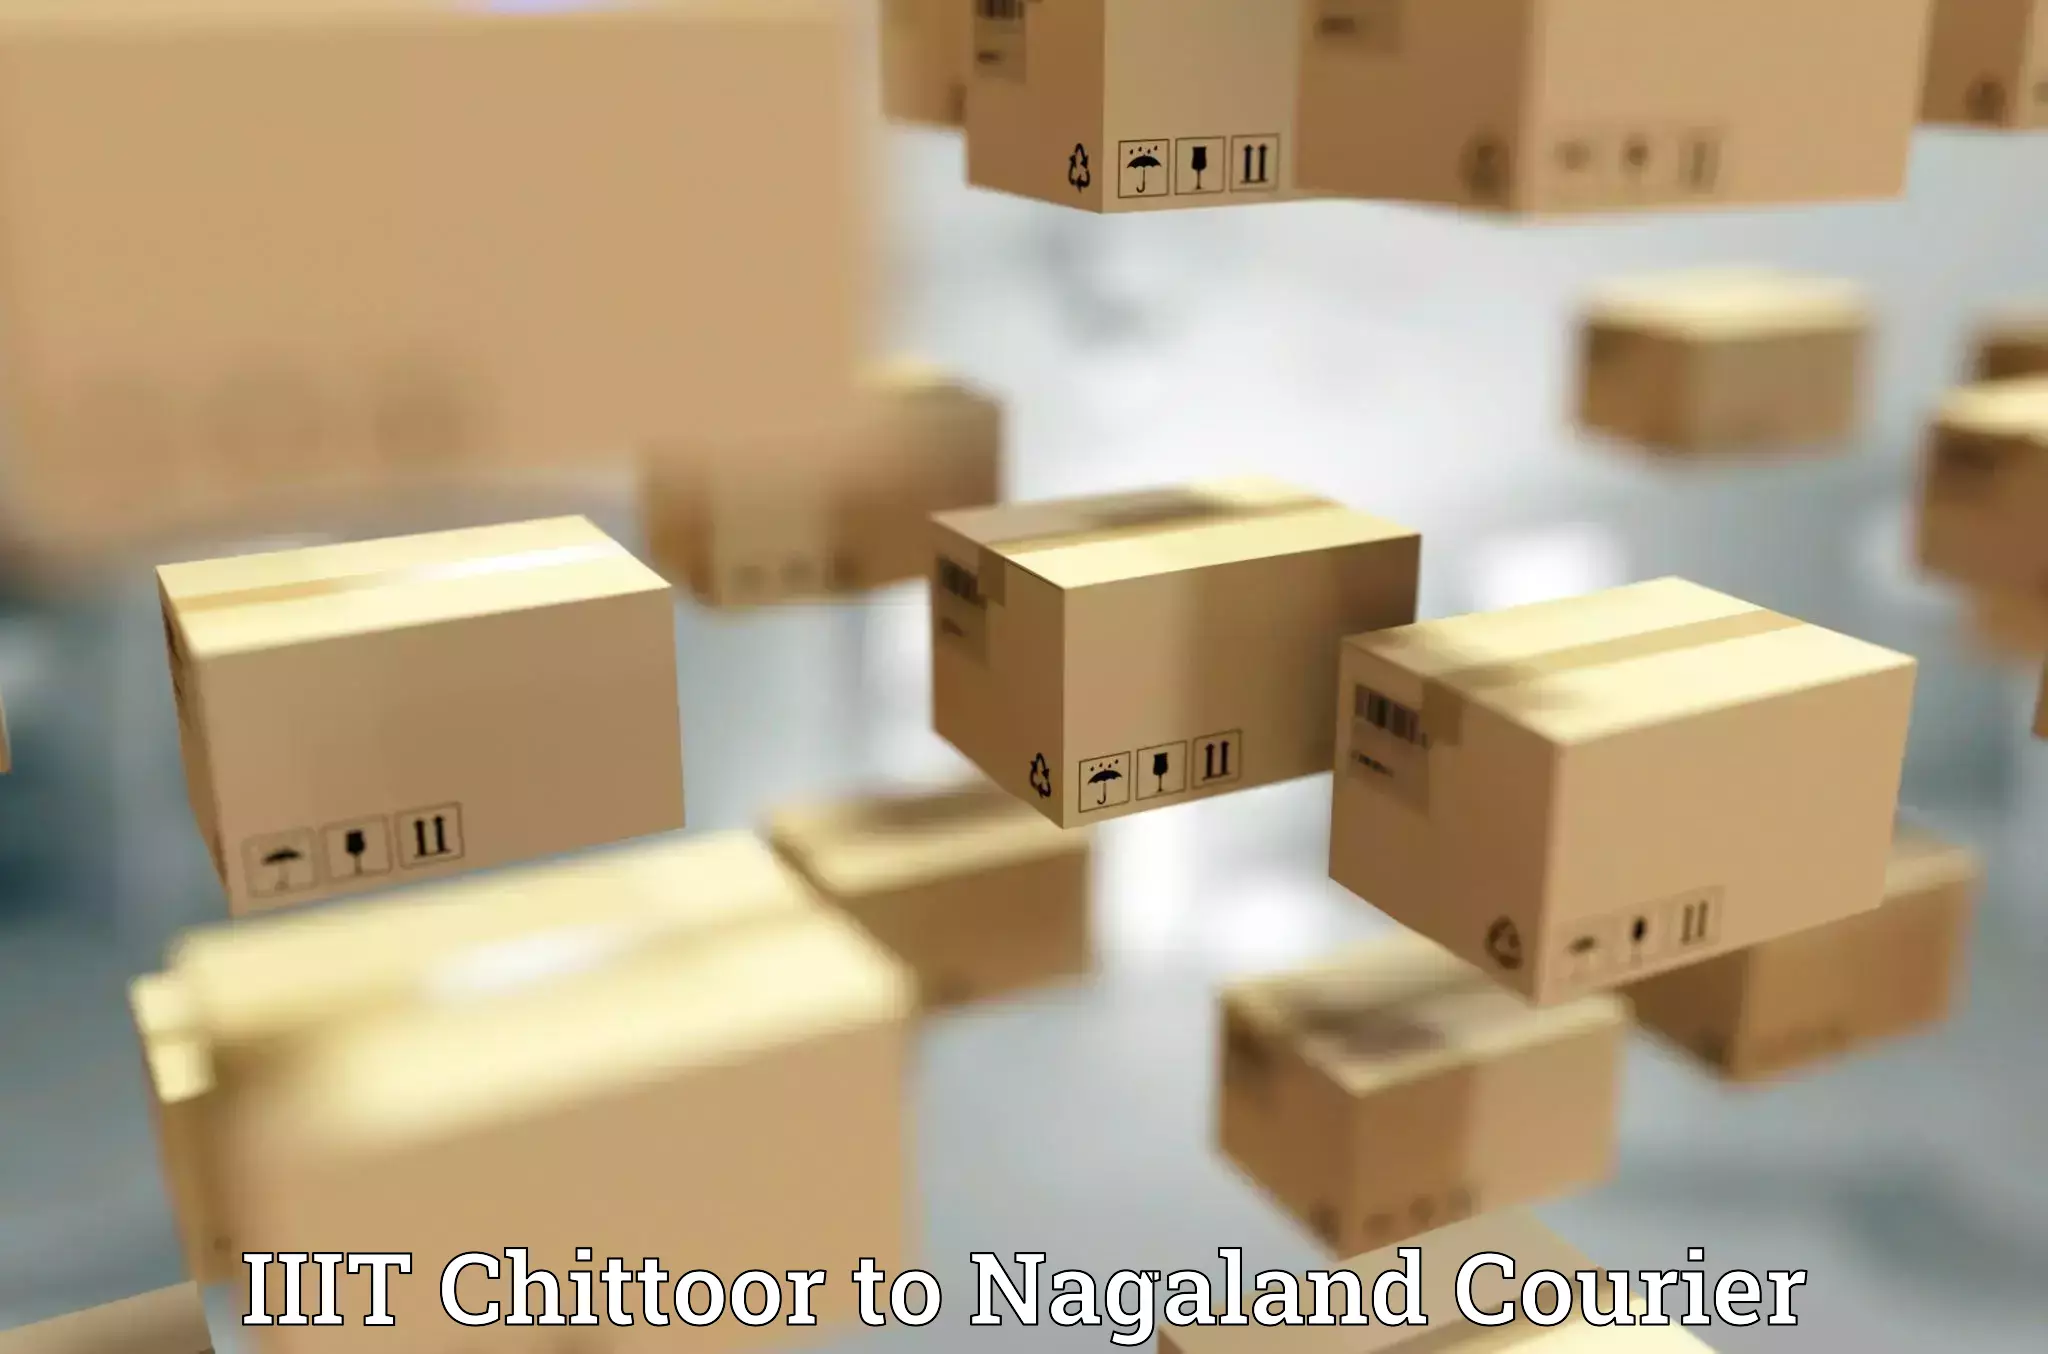 Multi-national courier services IIIT Chittoor to Mon